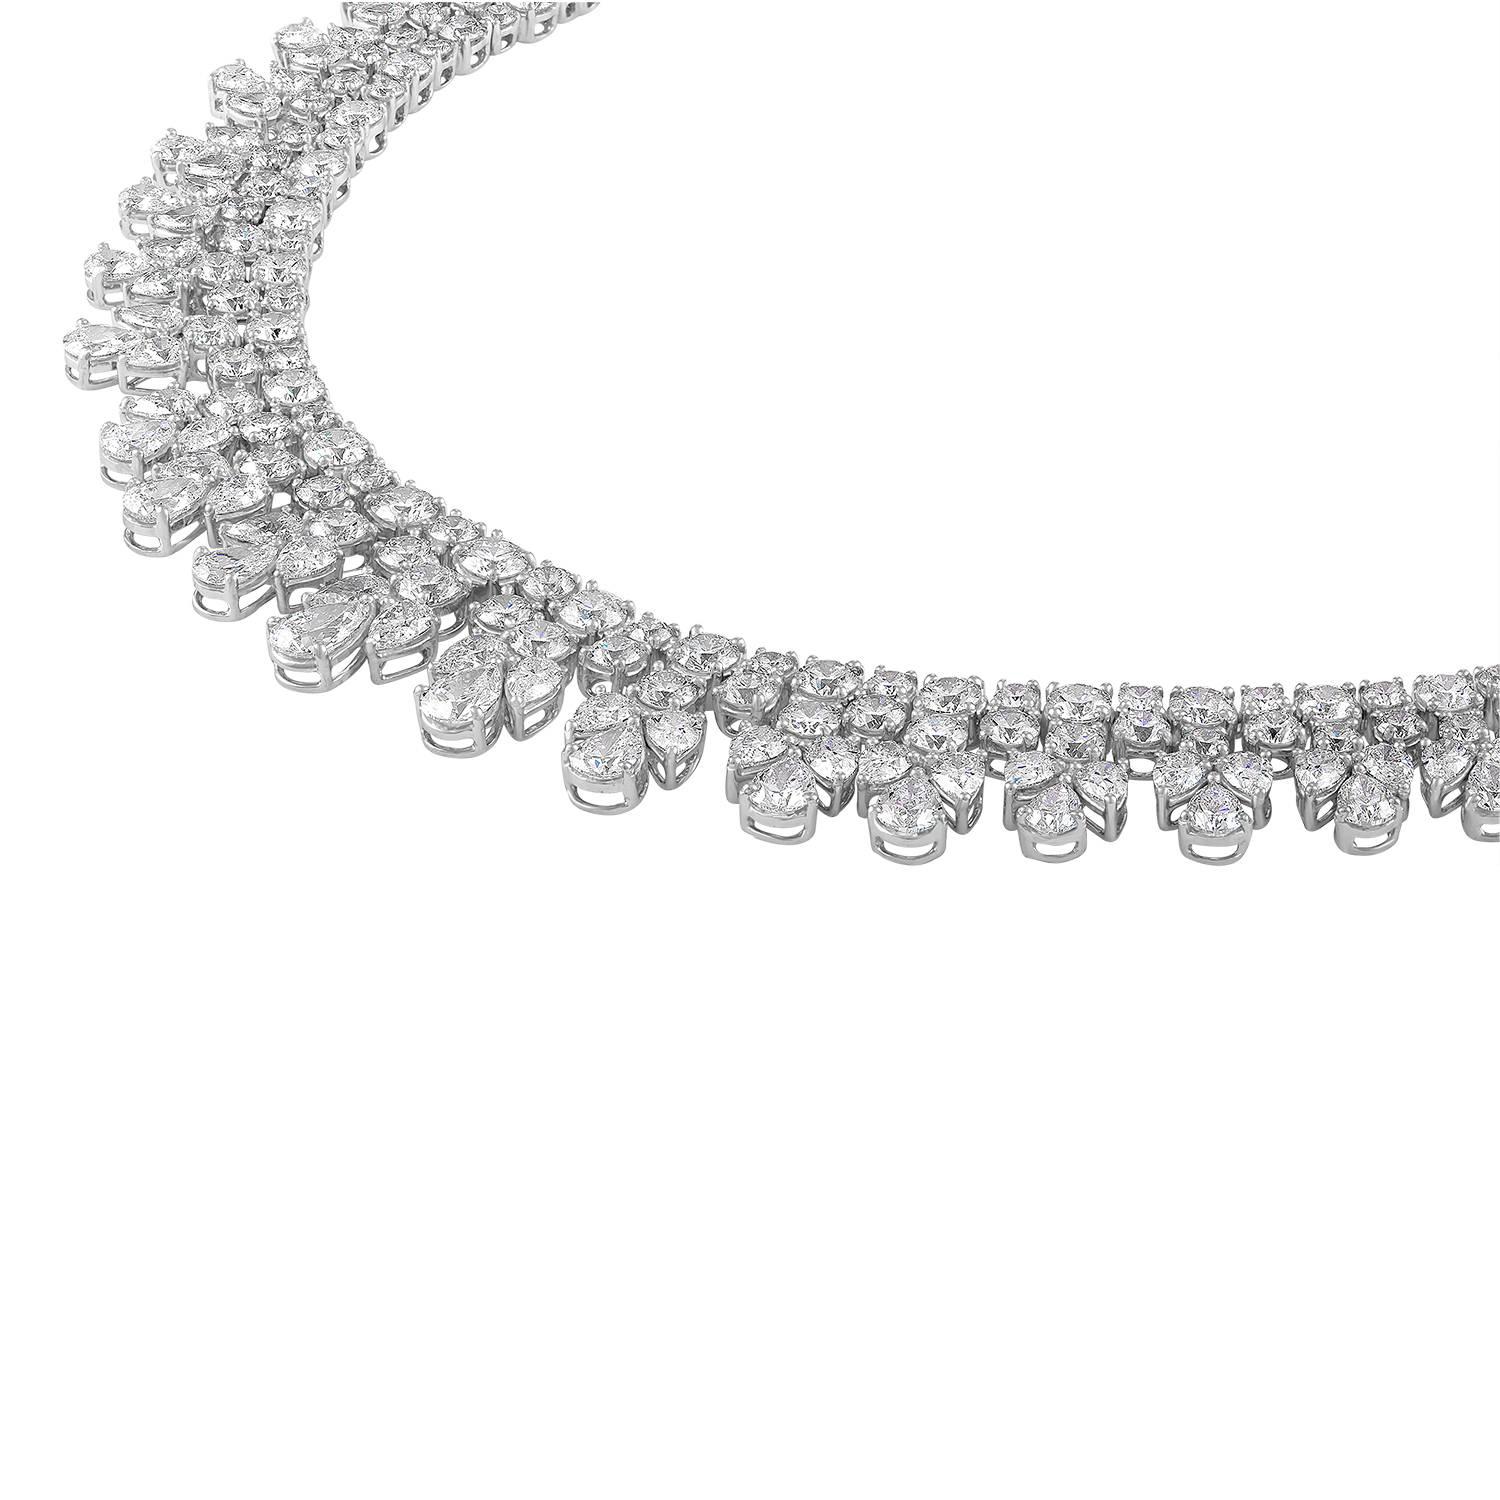 Amazing, one of a kind Diamond Necklace with approximately 50 Carats of 
White Diamonds.
This Necklace, 16.5",  has combined 333 Pear Shapes and Round Brilliants Diamonds all set in Platinum.
The Diamonds are F in color and VS in Clarity.
